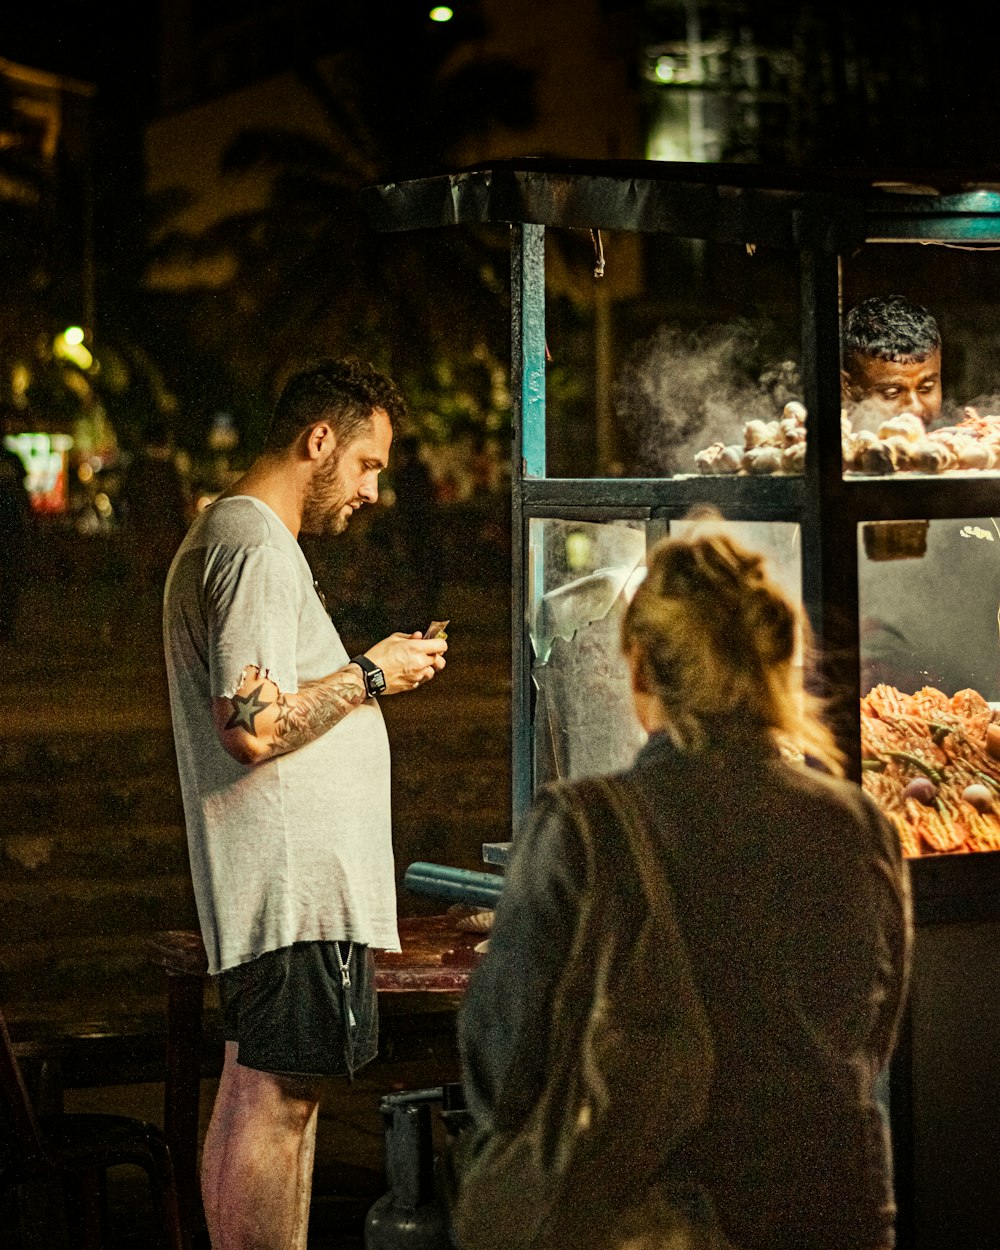 a man standing next to a woman in front of a food cart